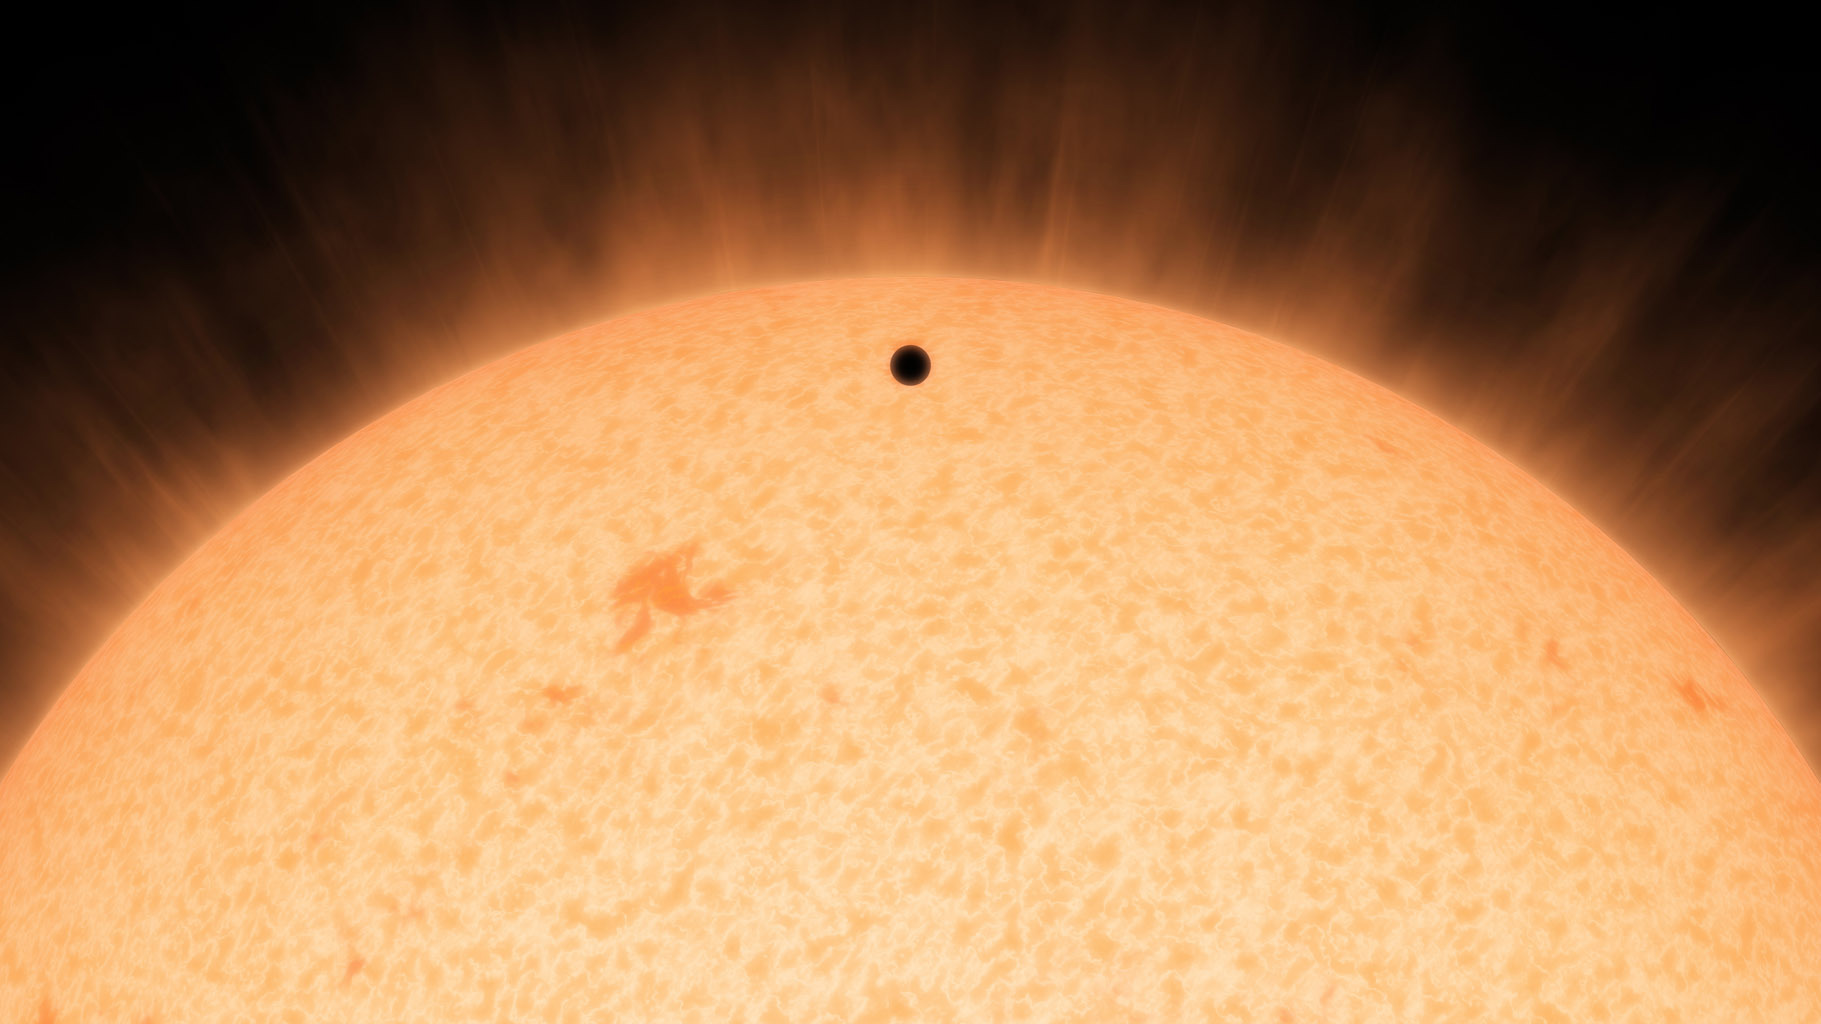 This artist's conception shows the silhouette of a rocky planet, dubbed HD 219134b, as it passes in front of its star. Image credit: NASA/JPL-Caltech